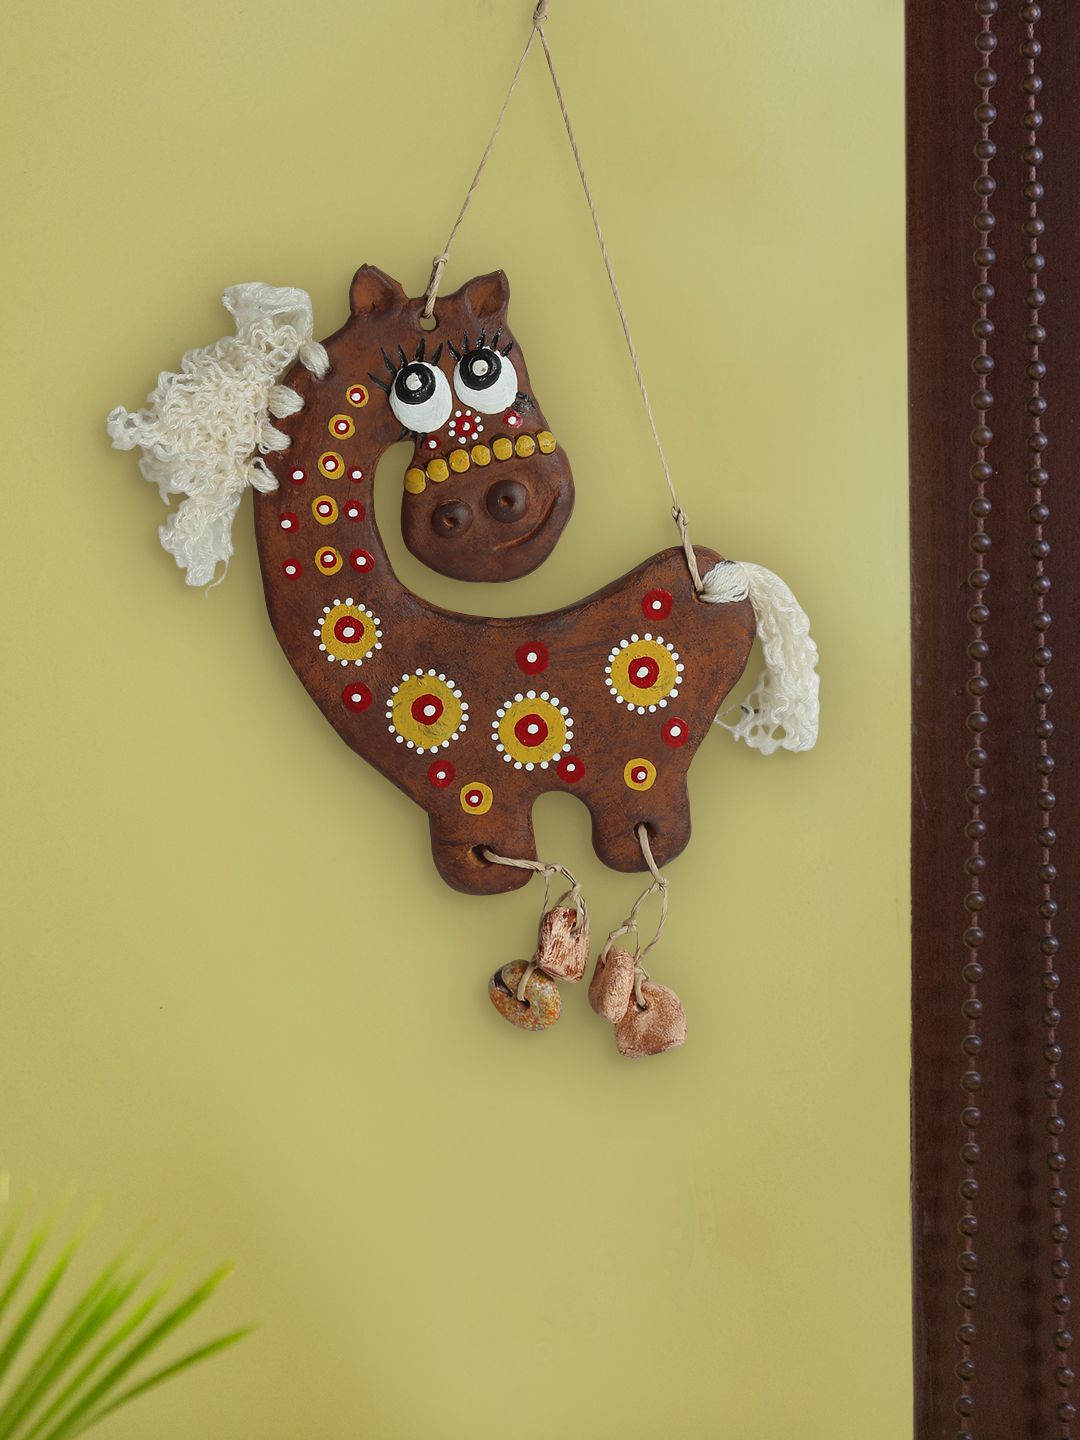 ExclusiveLane "Horse Shaped" Handmade & Hand-Painted Terracotta Wall Hanging Price in India